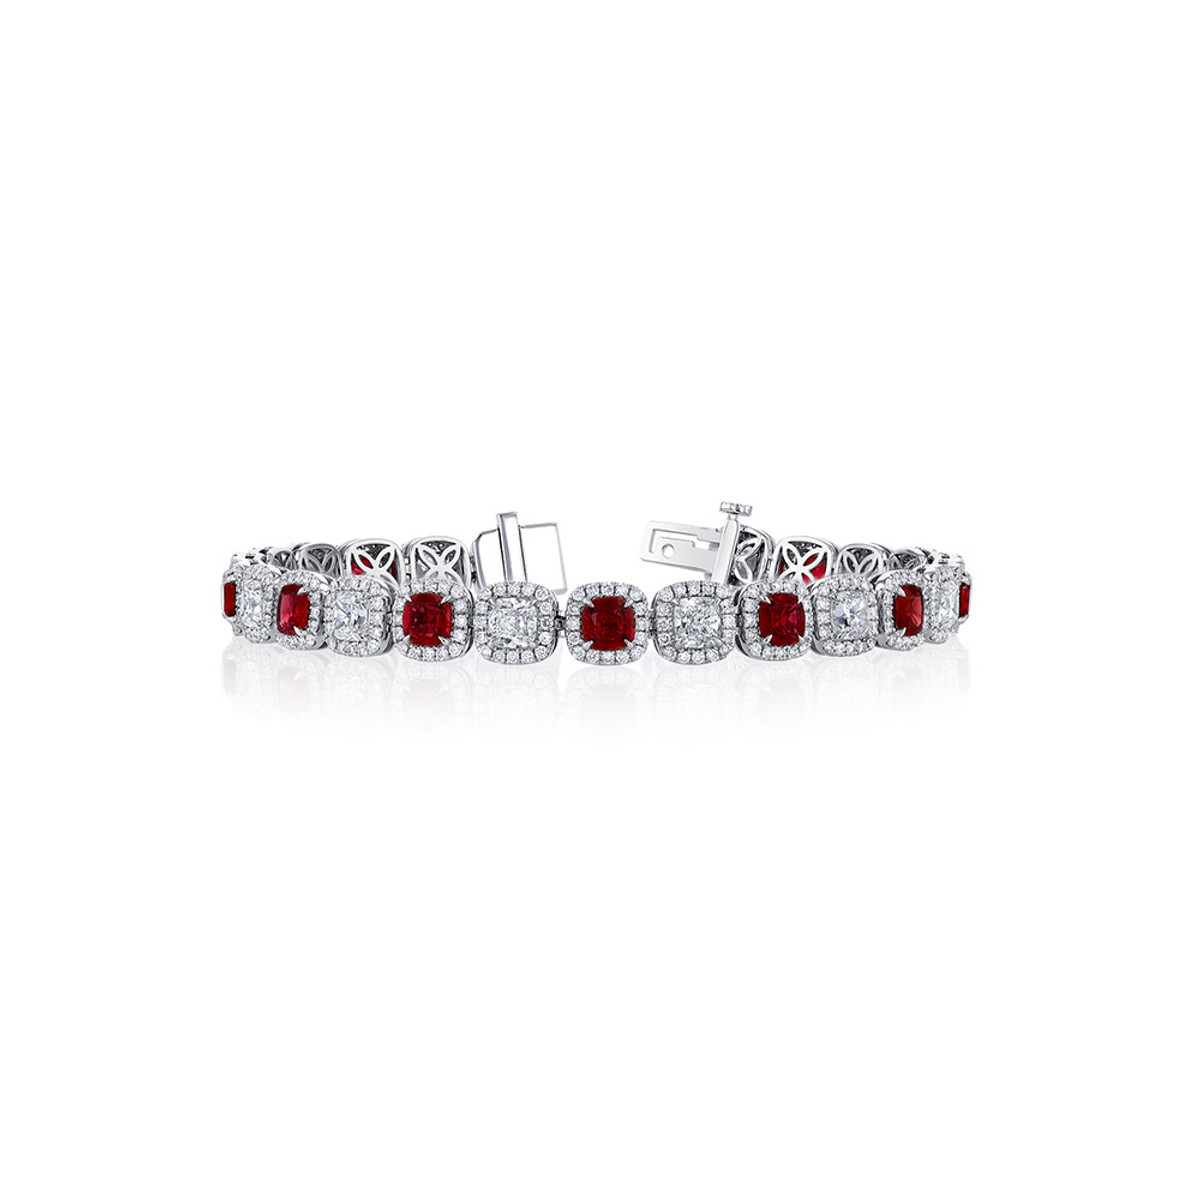 Hyde Park Collection Platinum Ruby and Diamond Line Bracelet-58367 Product Image